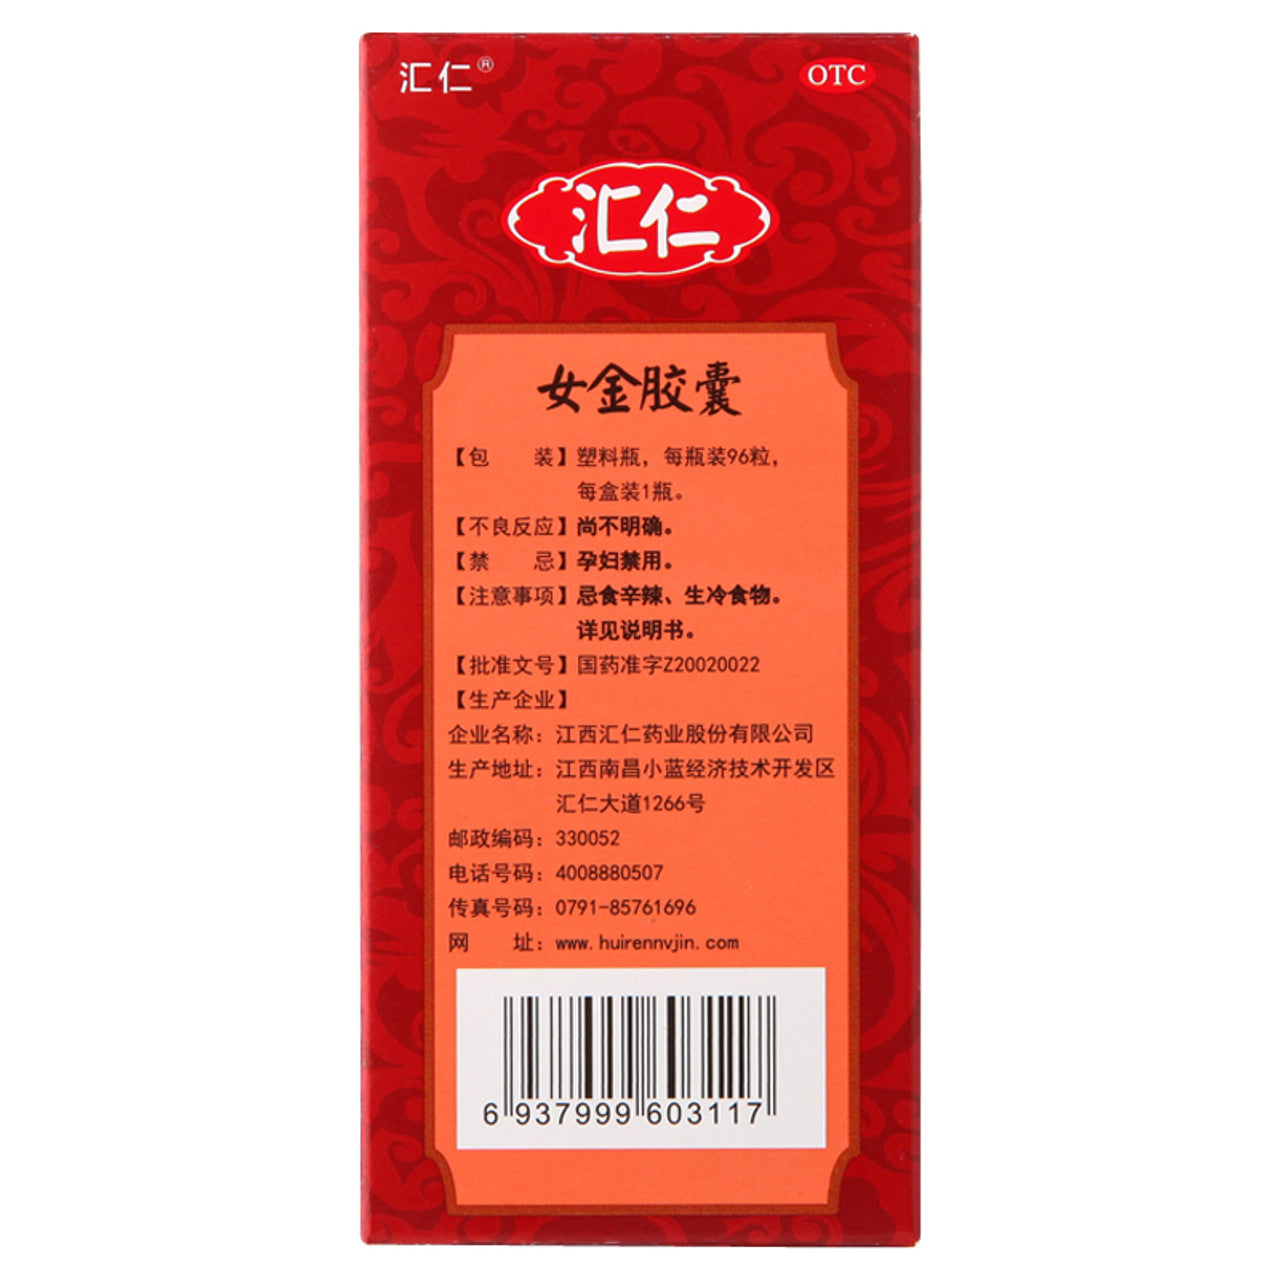 China Herb. Brand Huiren. Nujin jiaonang or Nujin Capsules or Nu Jin Jiao Nang or Nvjin Jiaonang or Nv Jin Jiao Nang or NvJinJiaoNang or NuJinJiaoNang for Regulate menstruation and nourish blood, regulate qi and relieve pain.